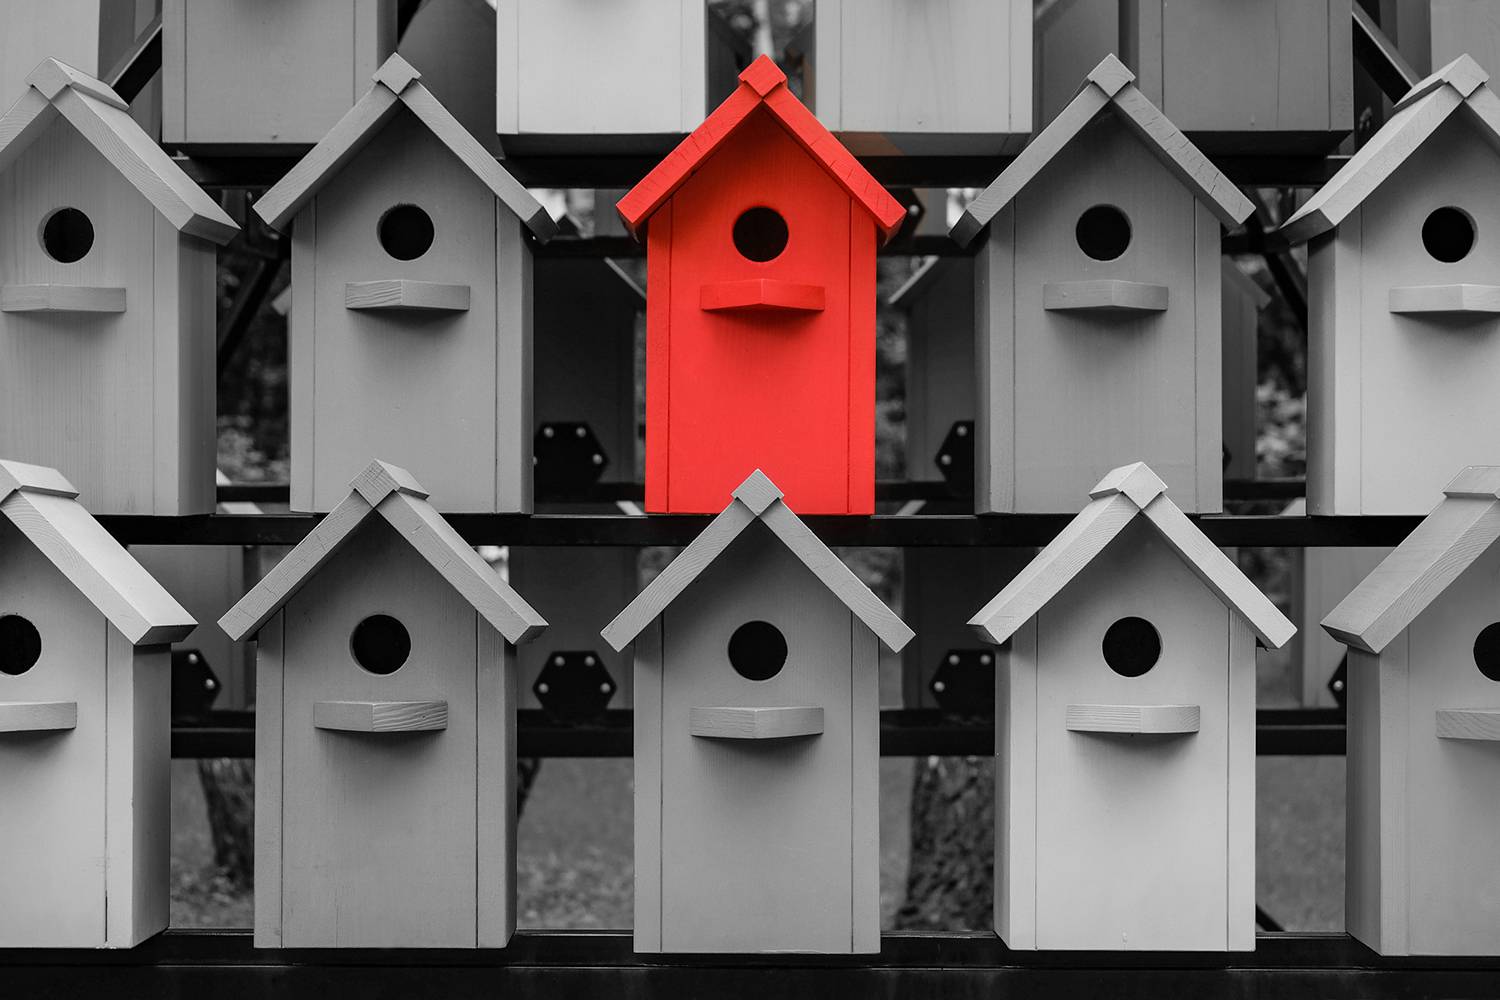 birdhouses, grey with one red.